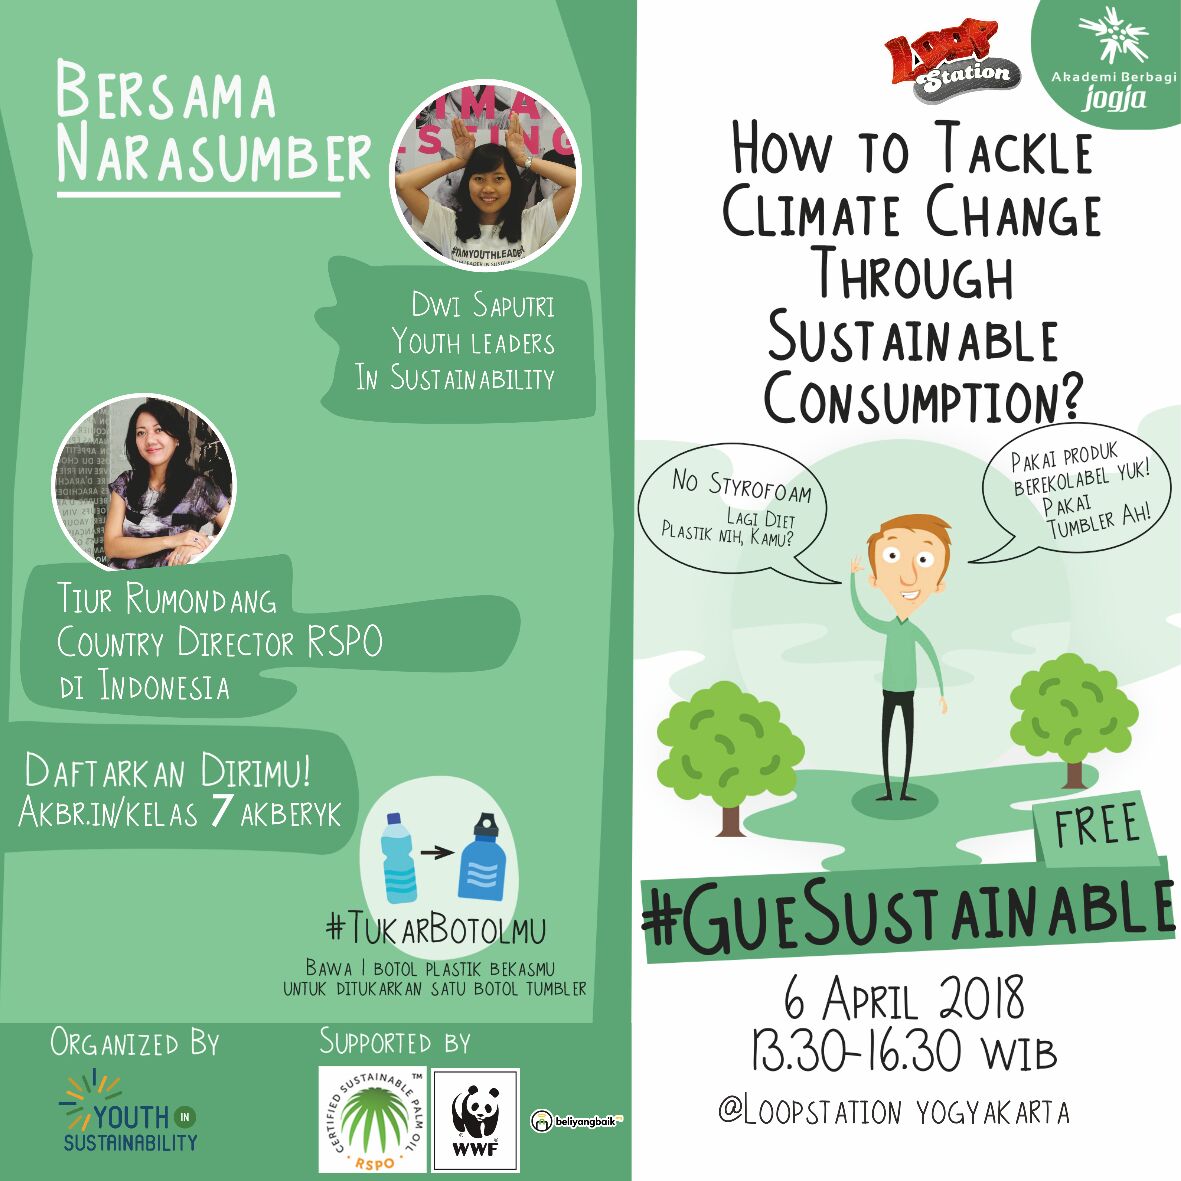 Jogja: How To Tackle Climate Change Through Sustainable Consumption 